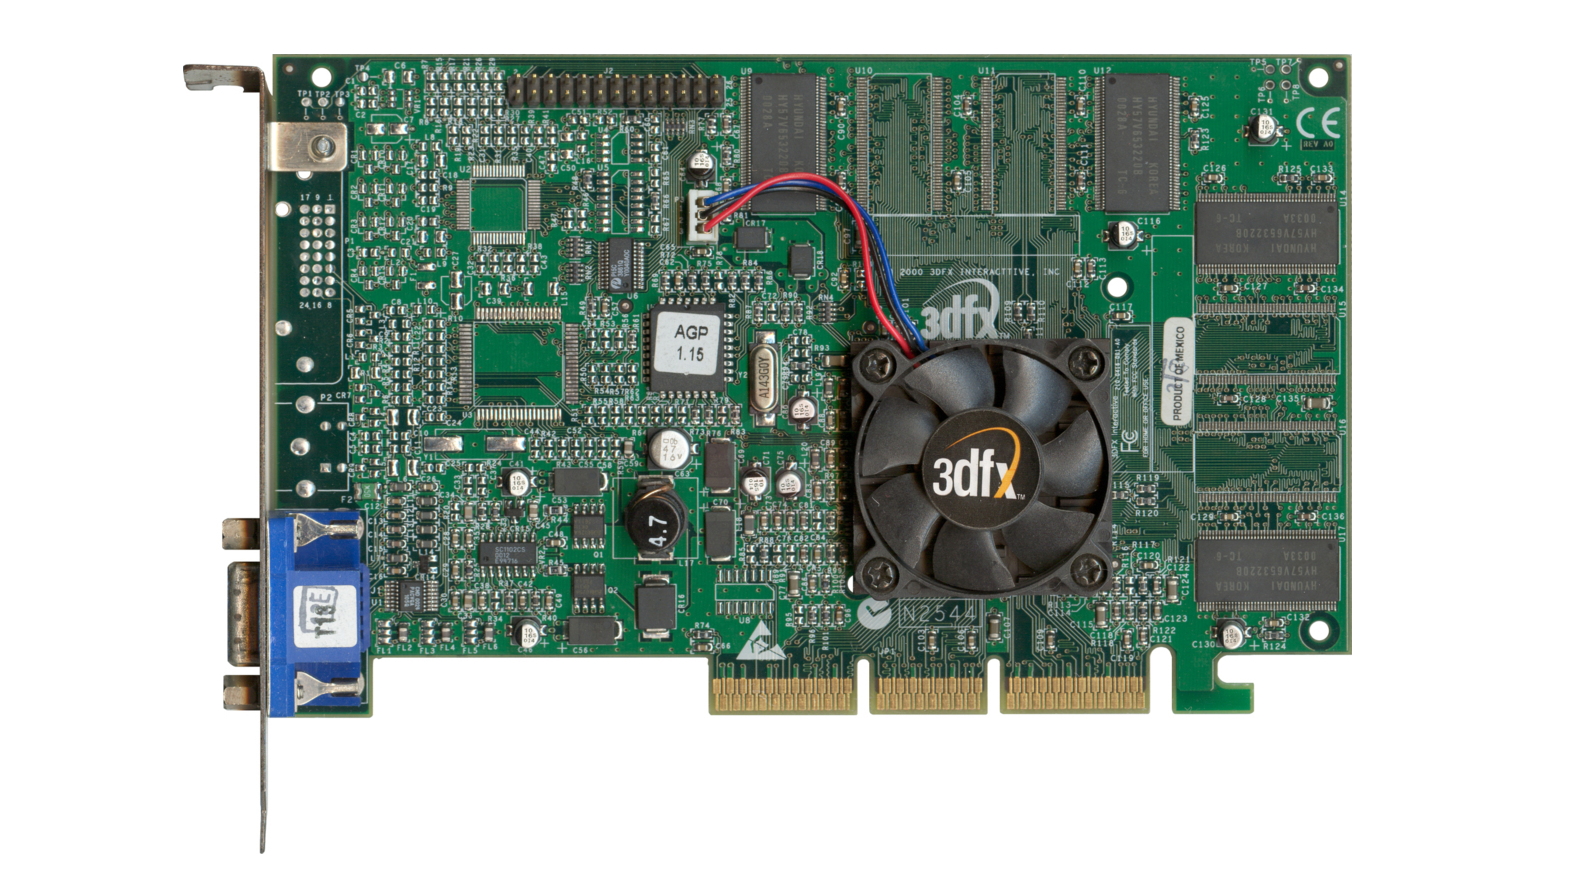 3dfx Voodoo 4 4500 on white background